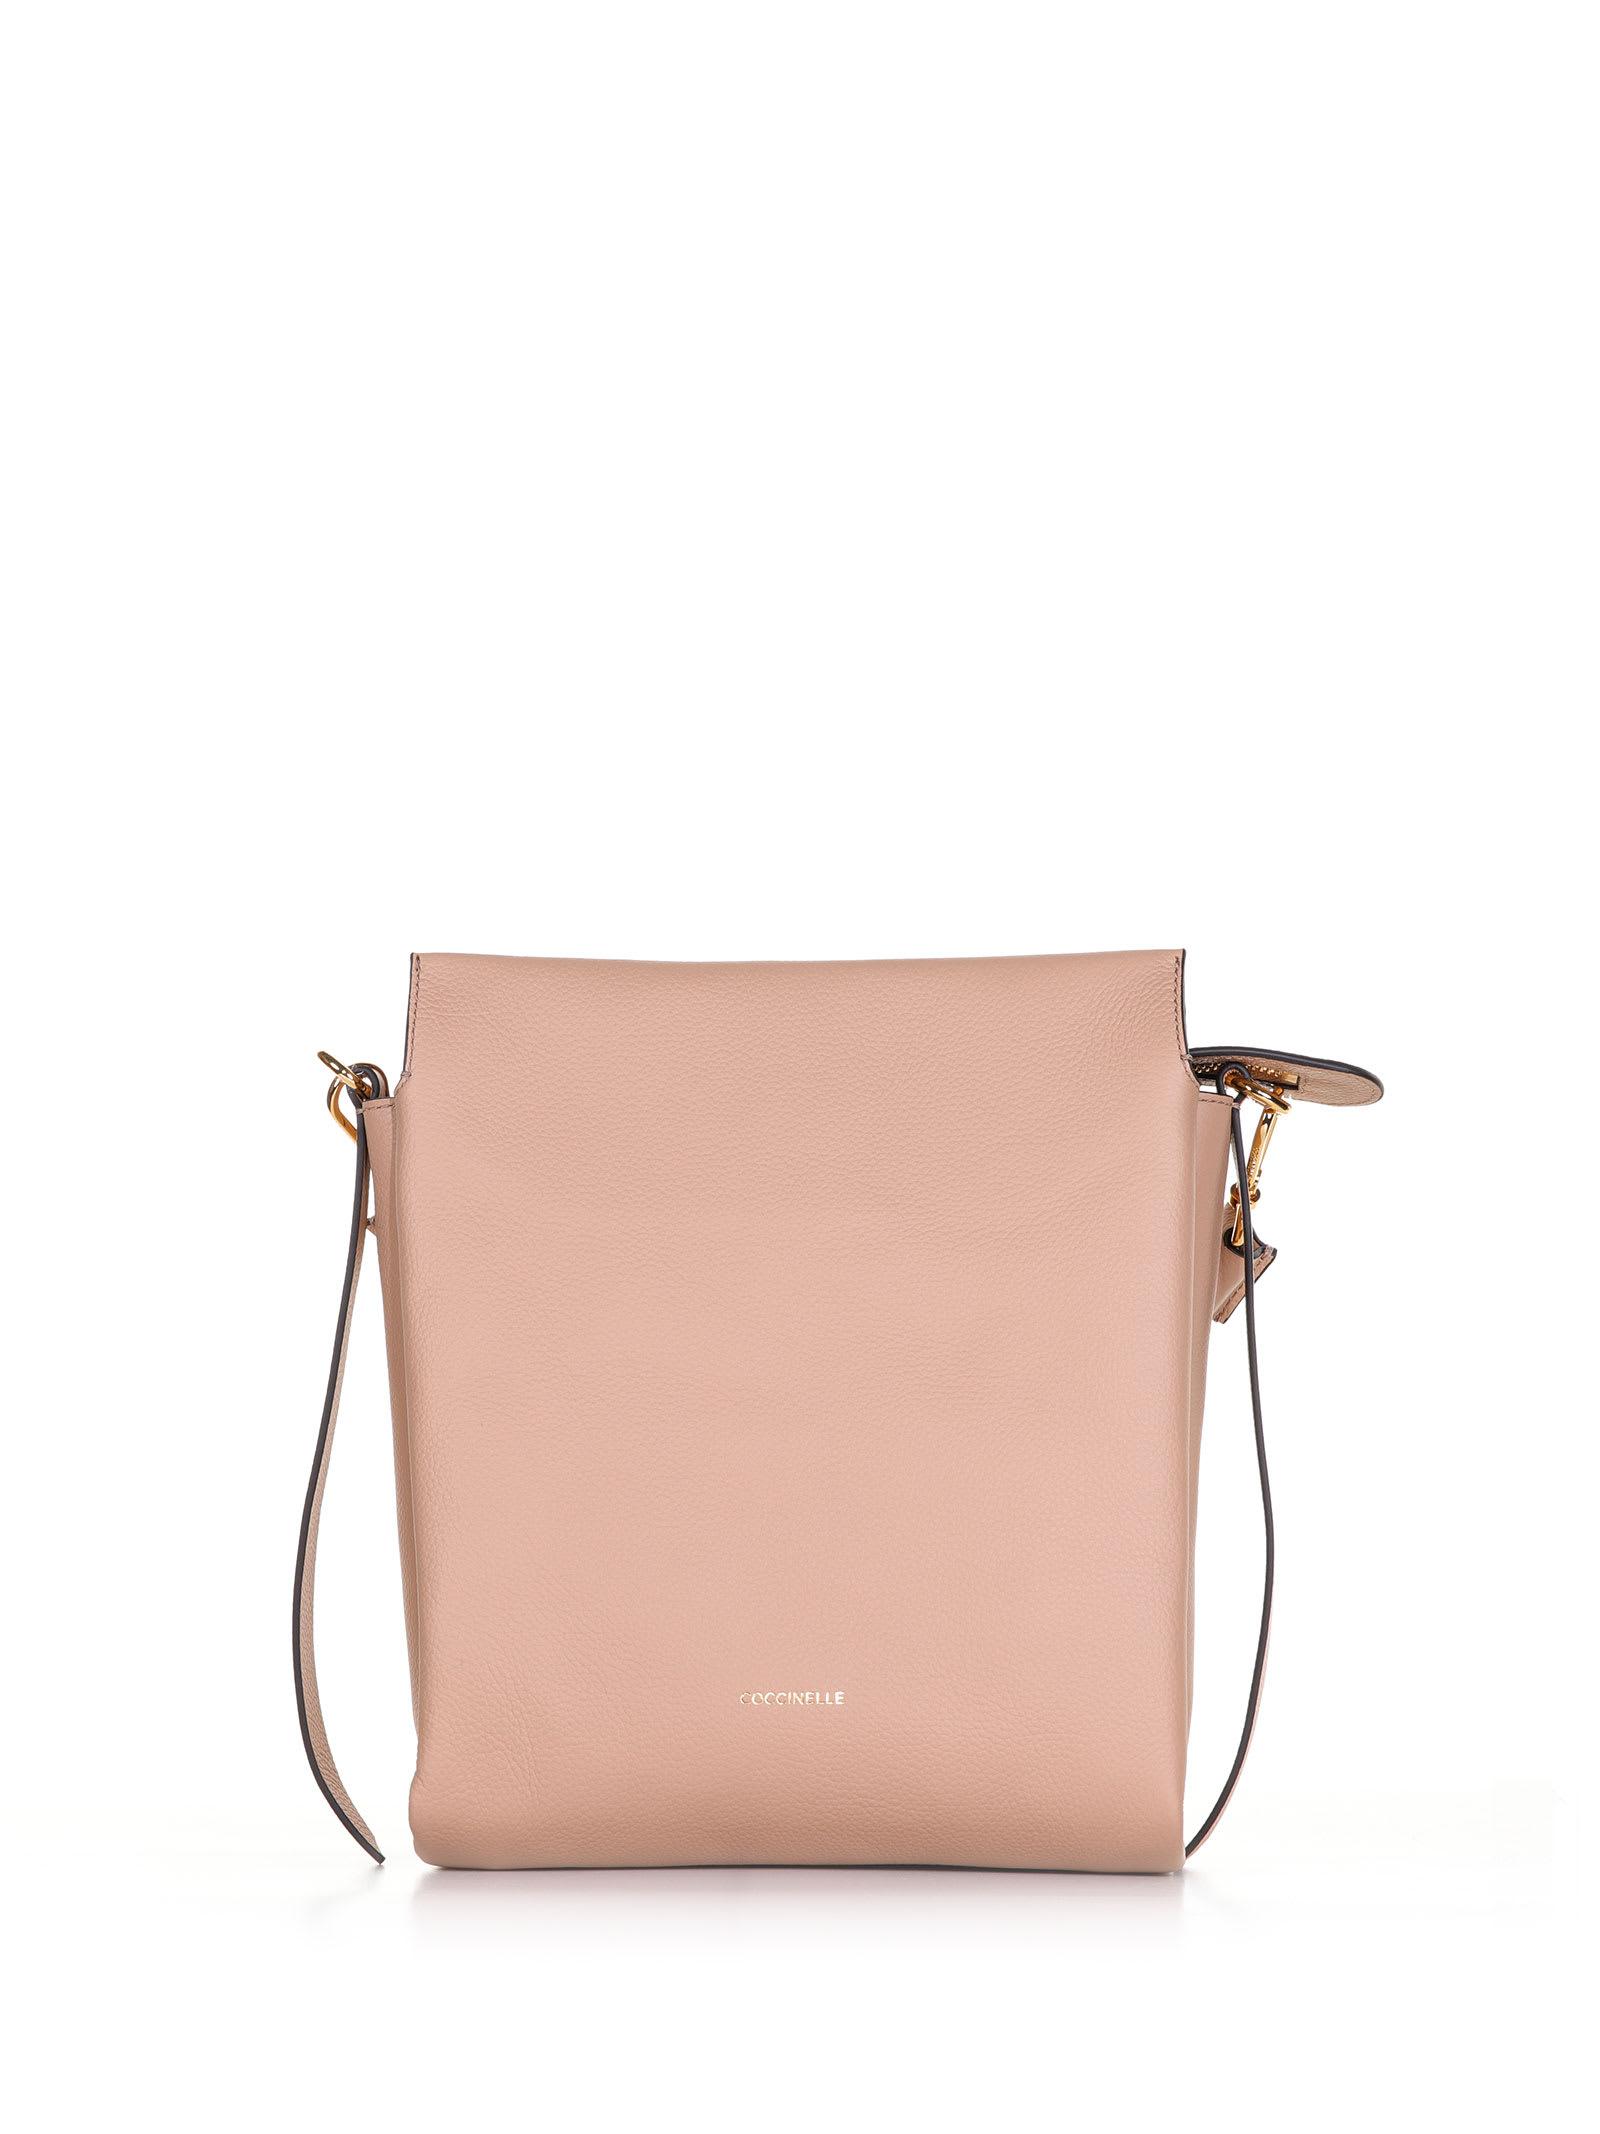 Coccinelle Boheme Bag With Curled Handle in Pink | Lyst